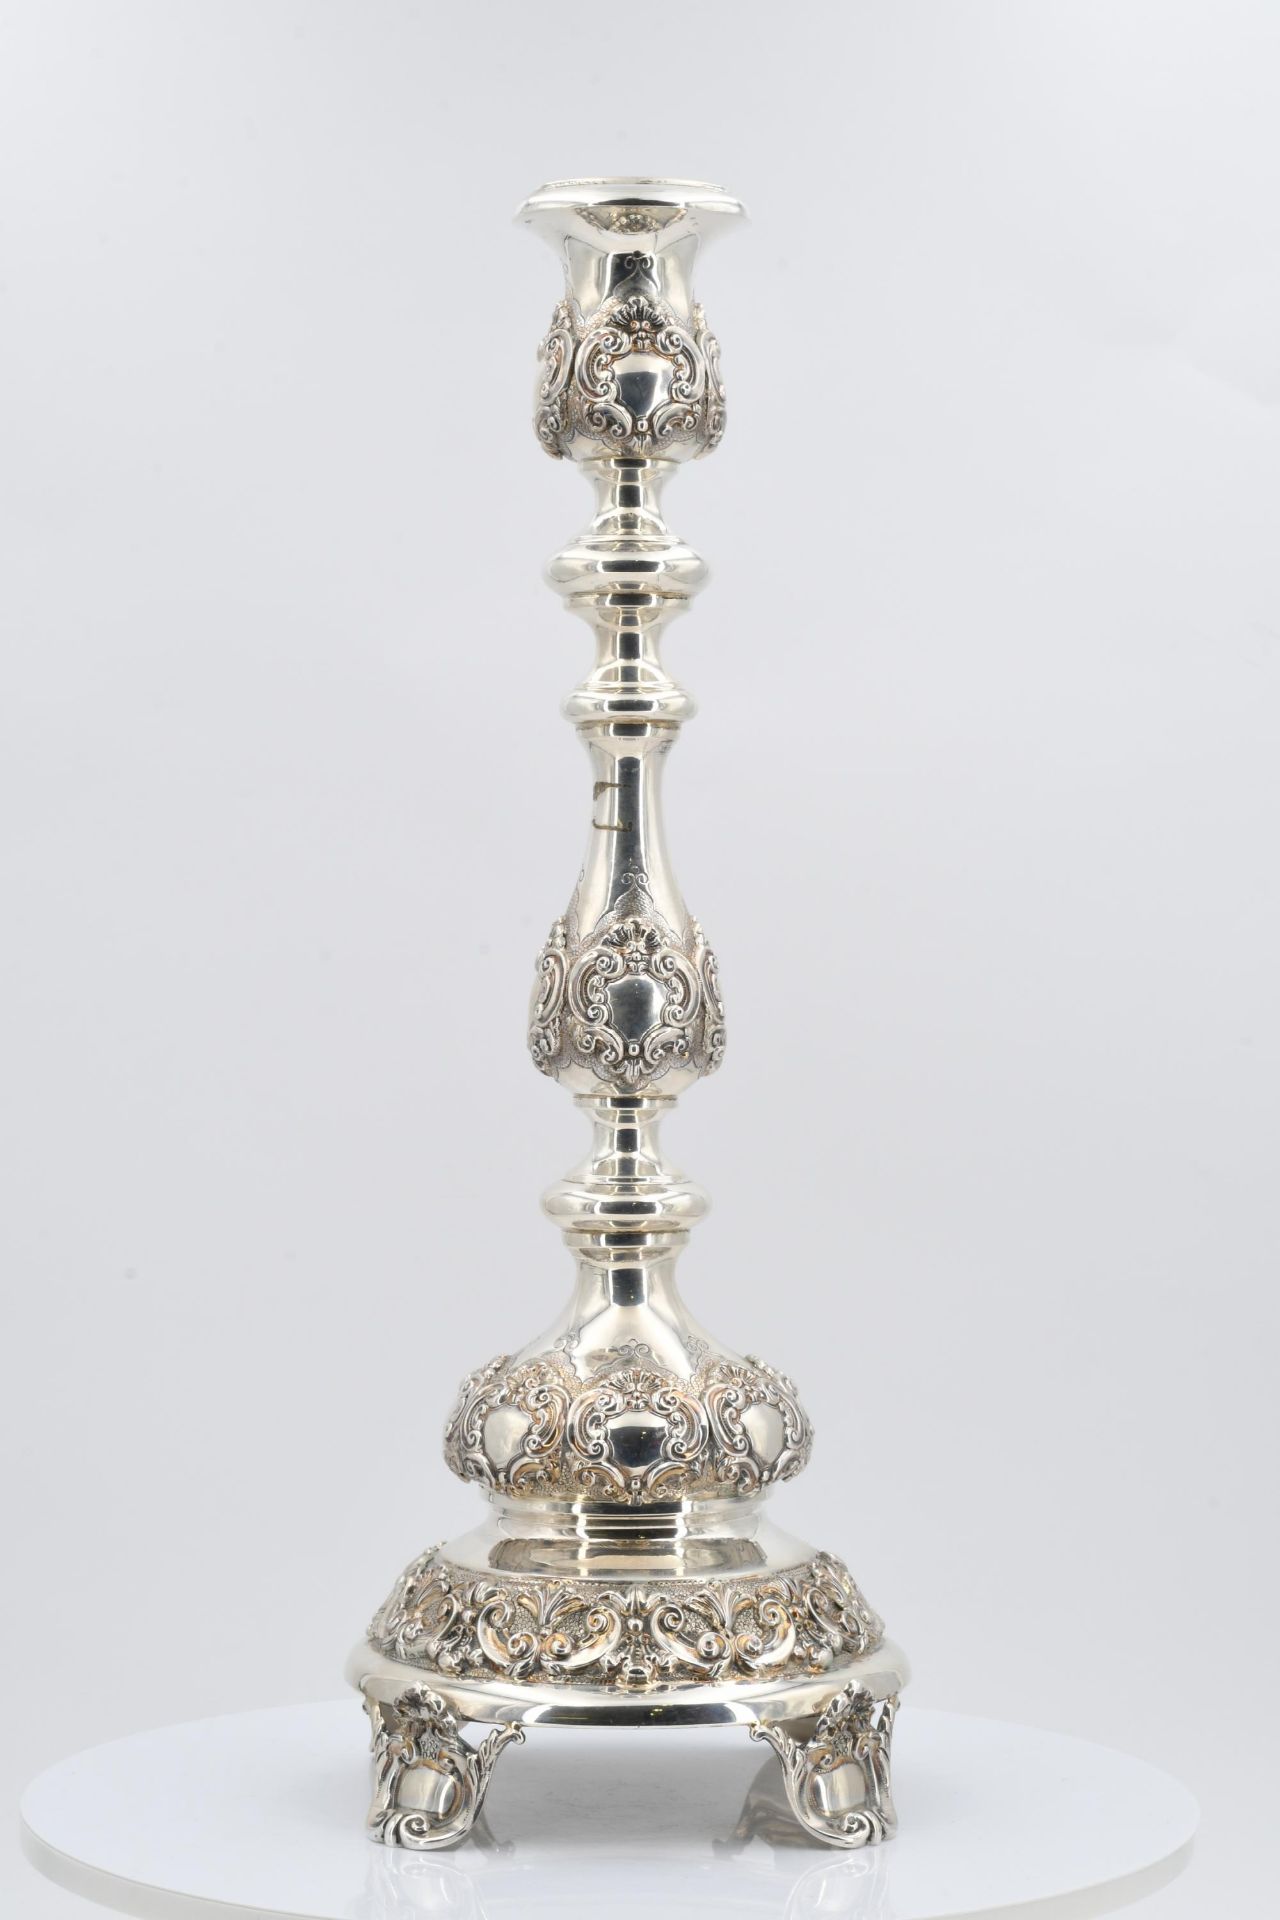 Pair of large candlesticks with baluster shaft - Image 9 of 13